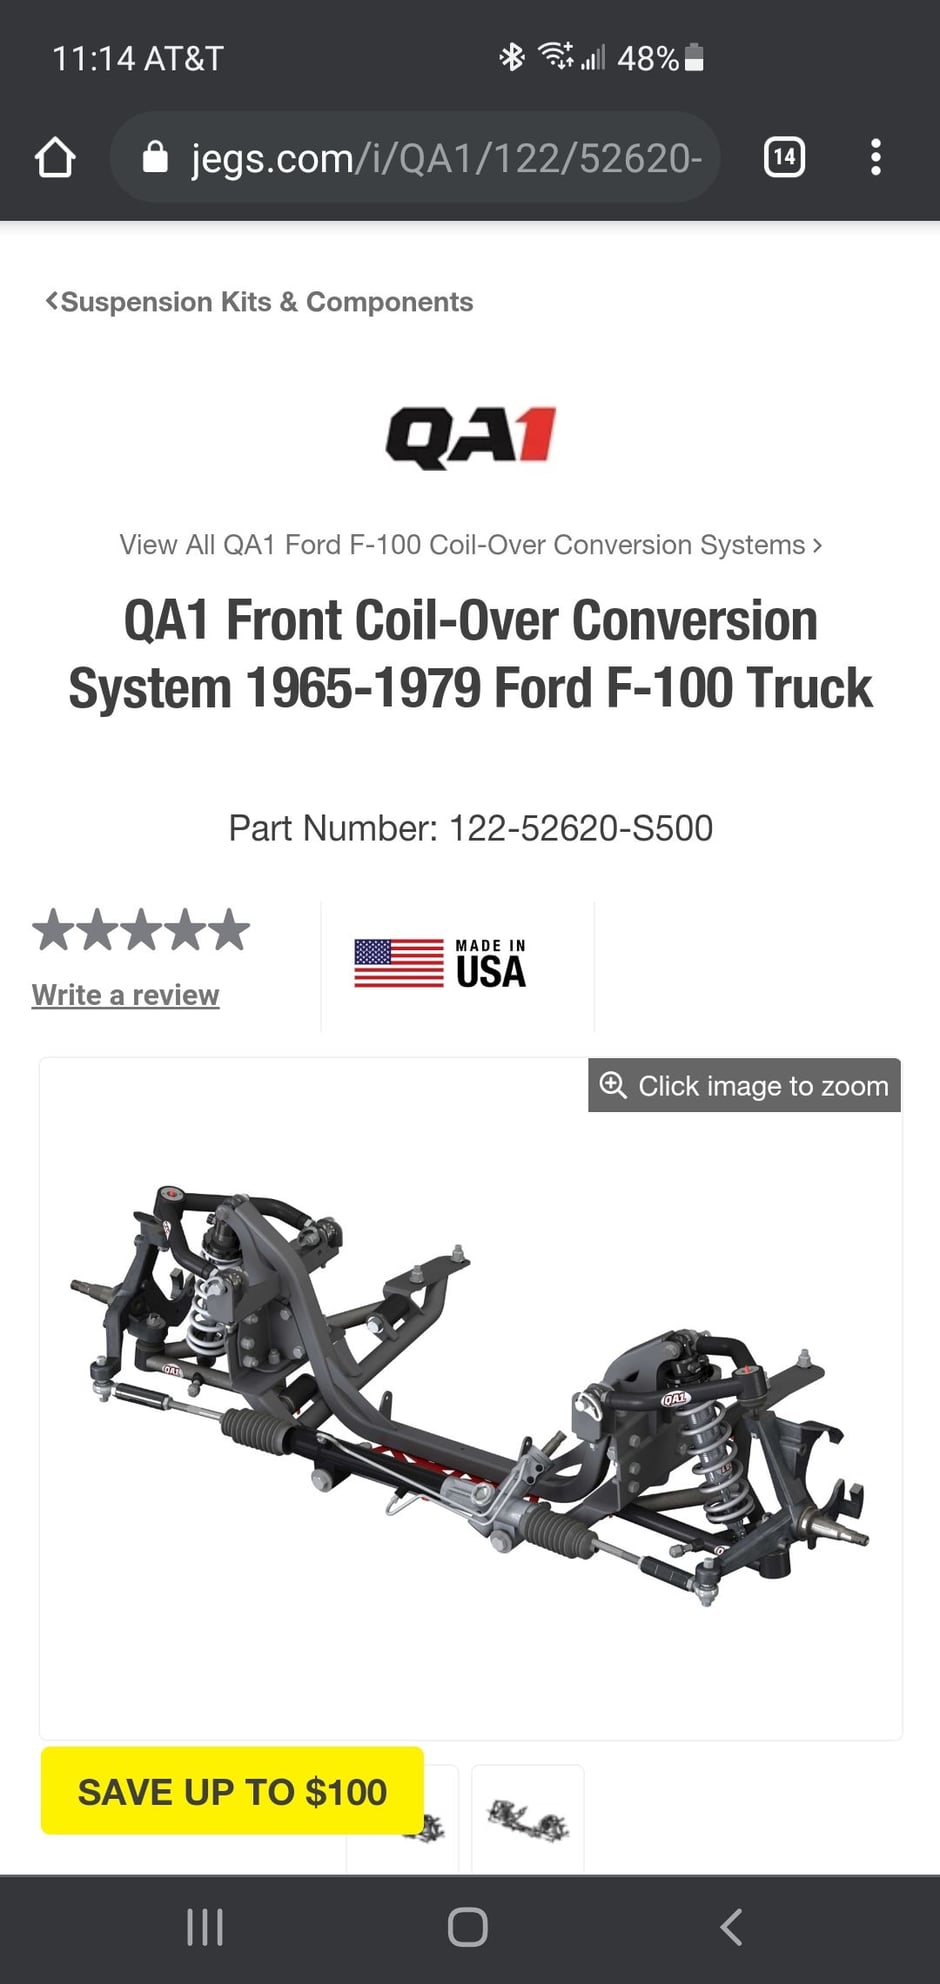 1973 F250 Suspension Upgrade Options - Ford Truck Enthusiasts Forums